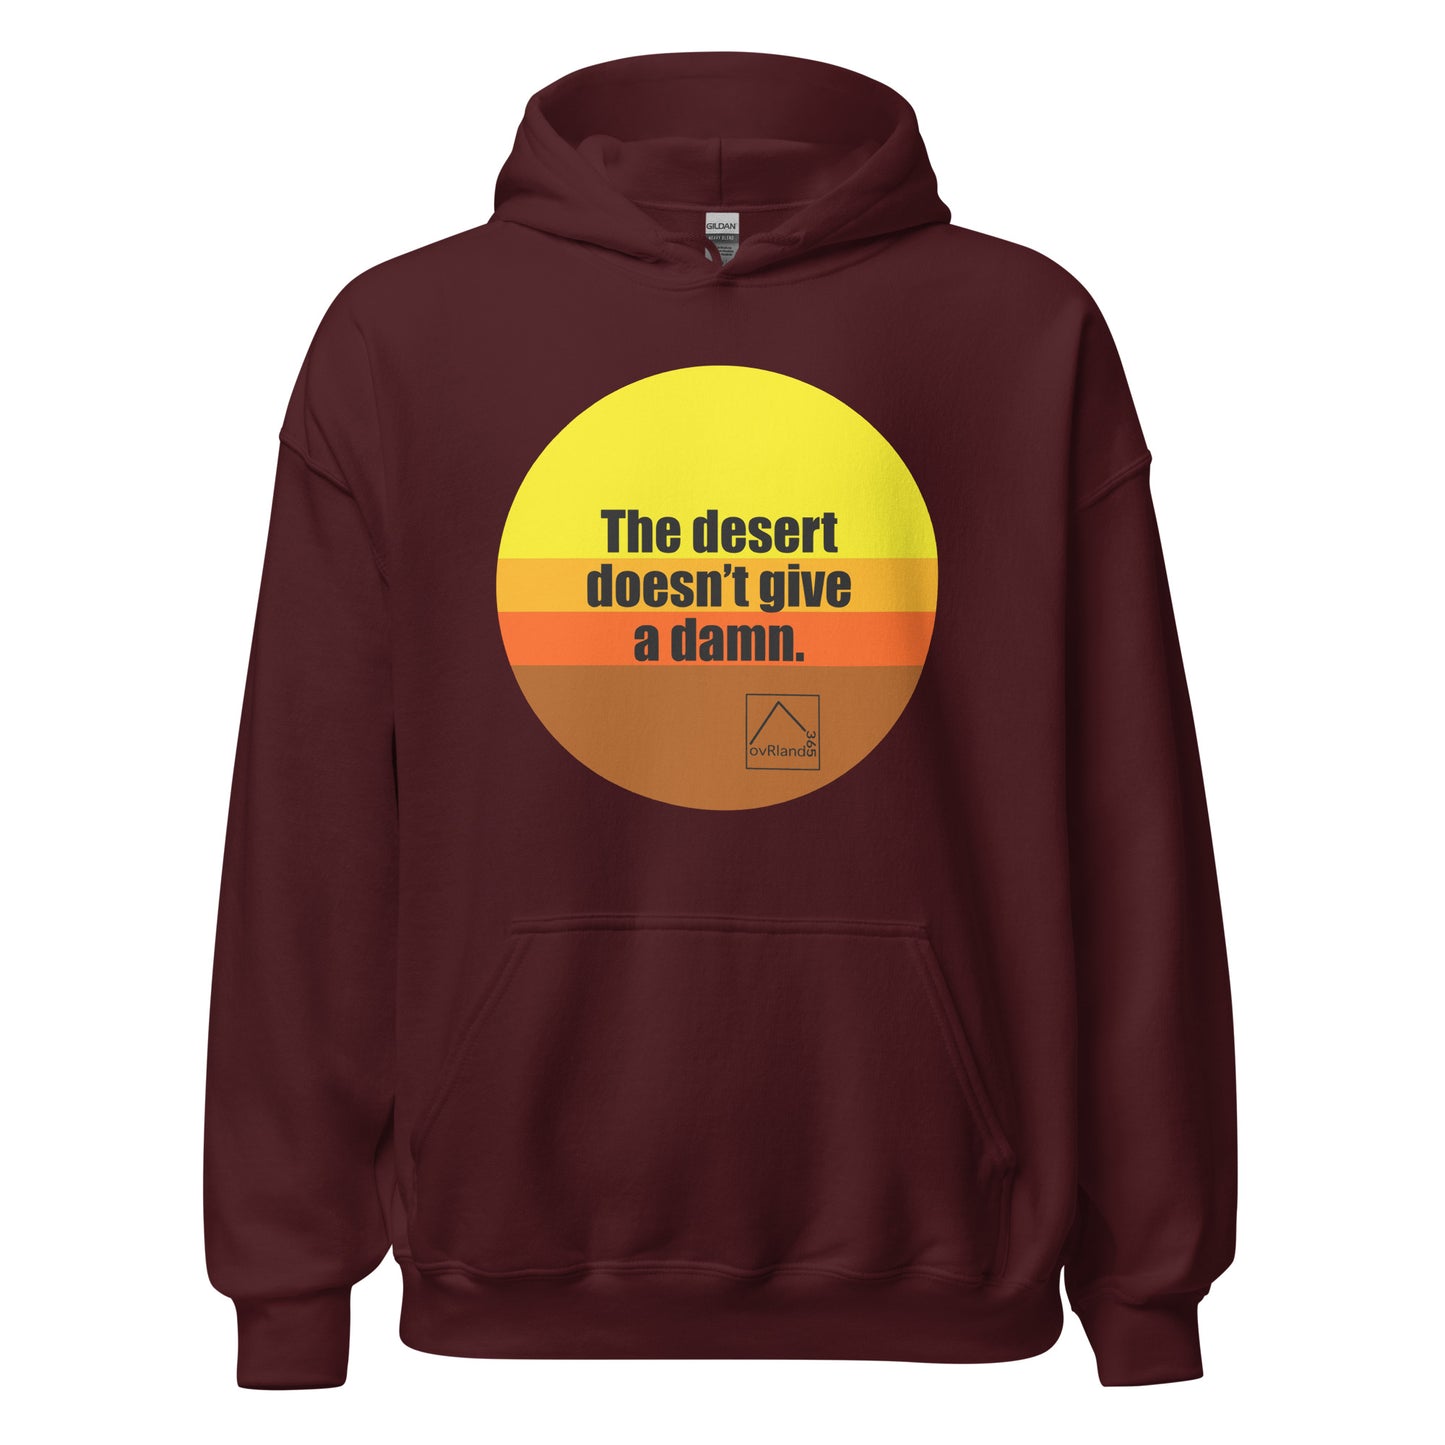 The desert doesn't give a damn. Maroon hoodie. overland365.com